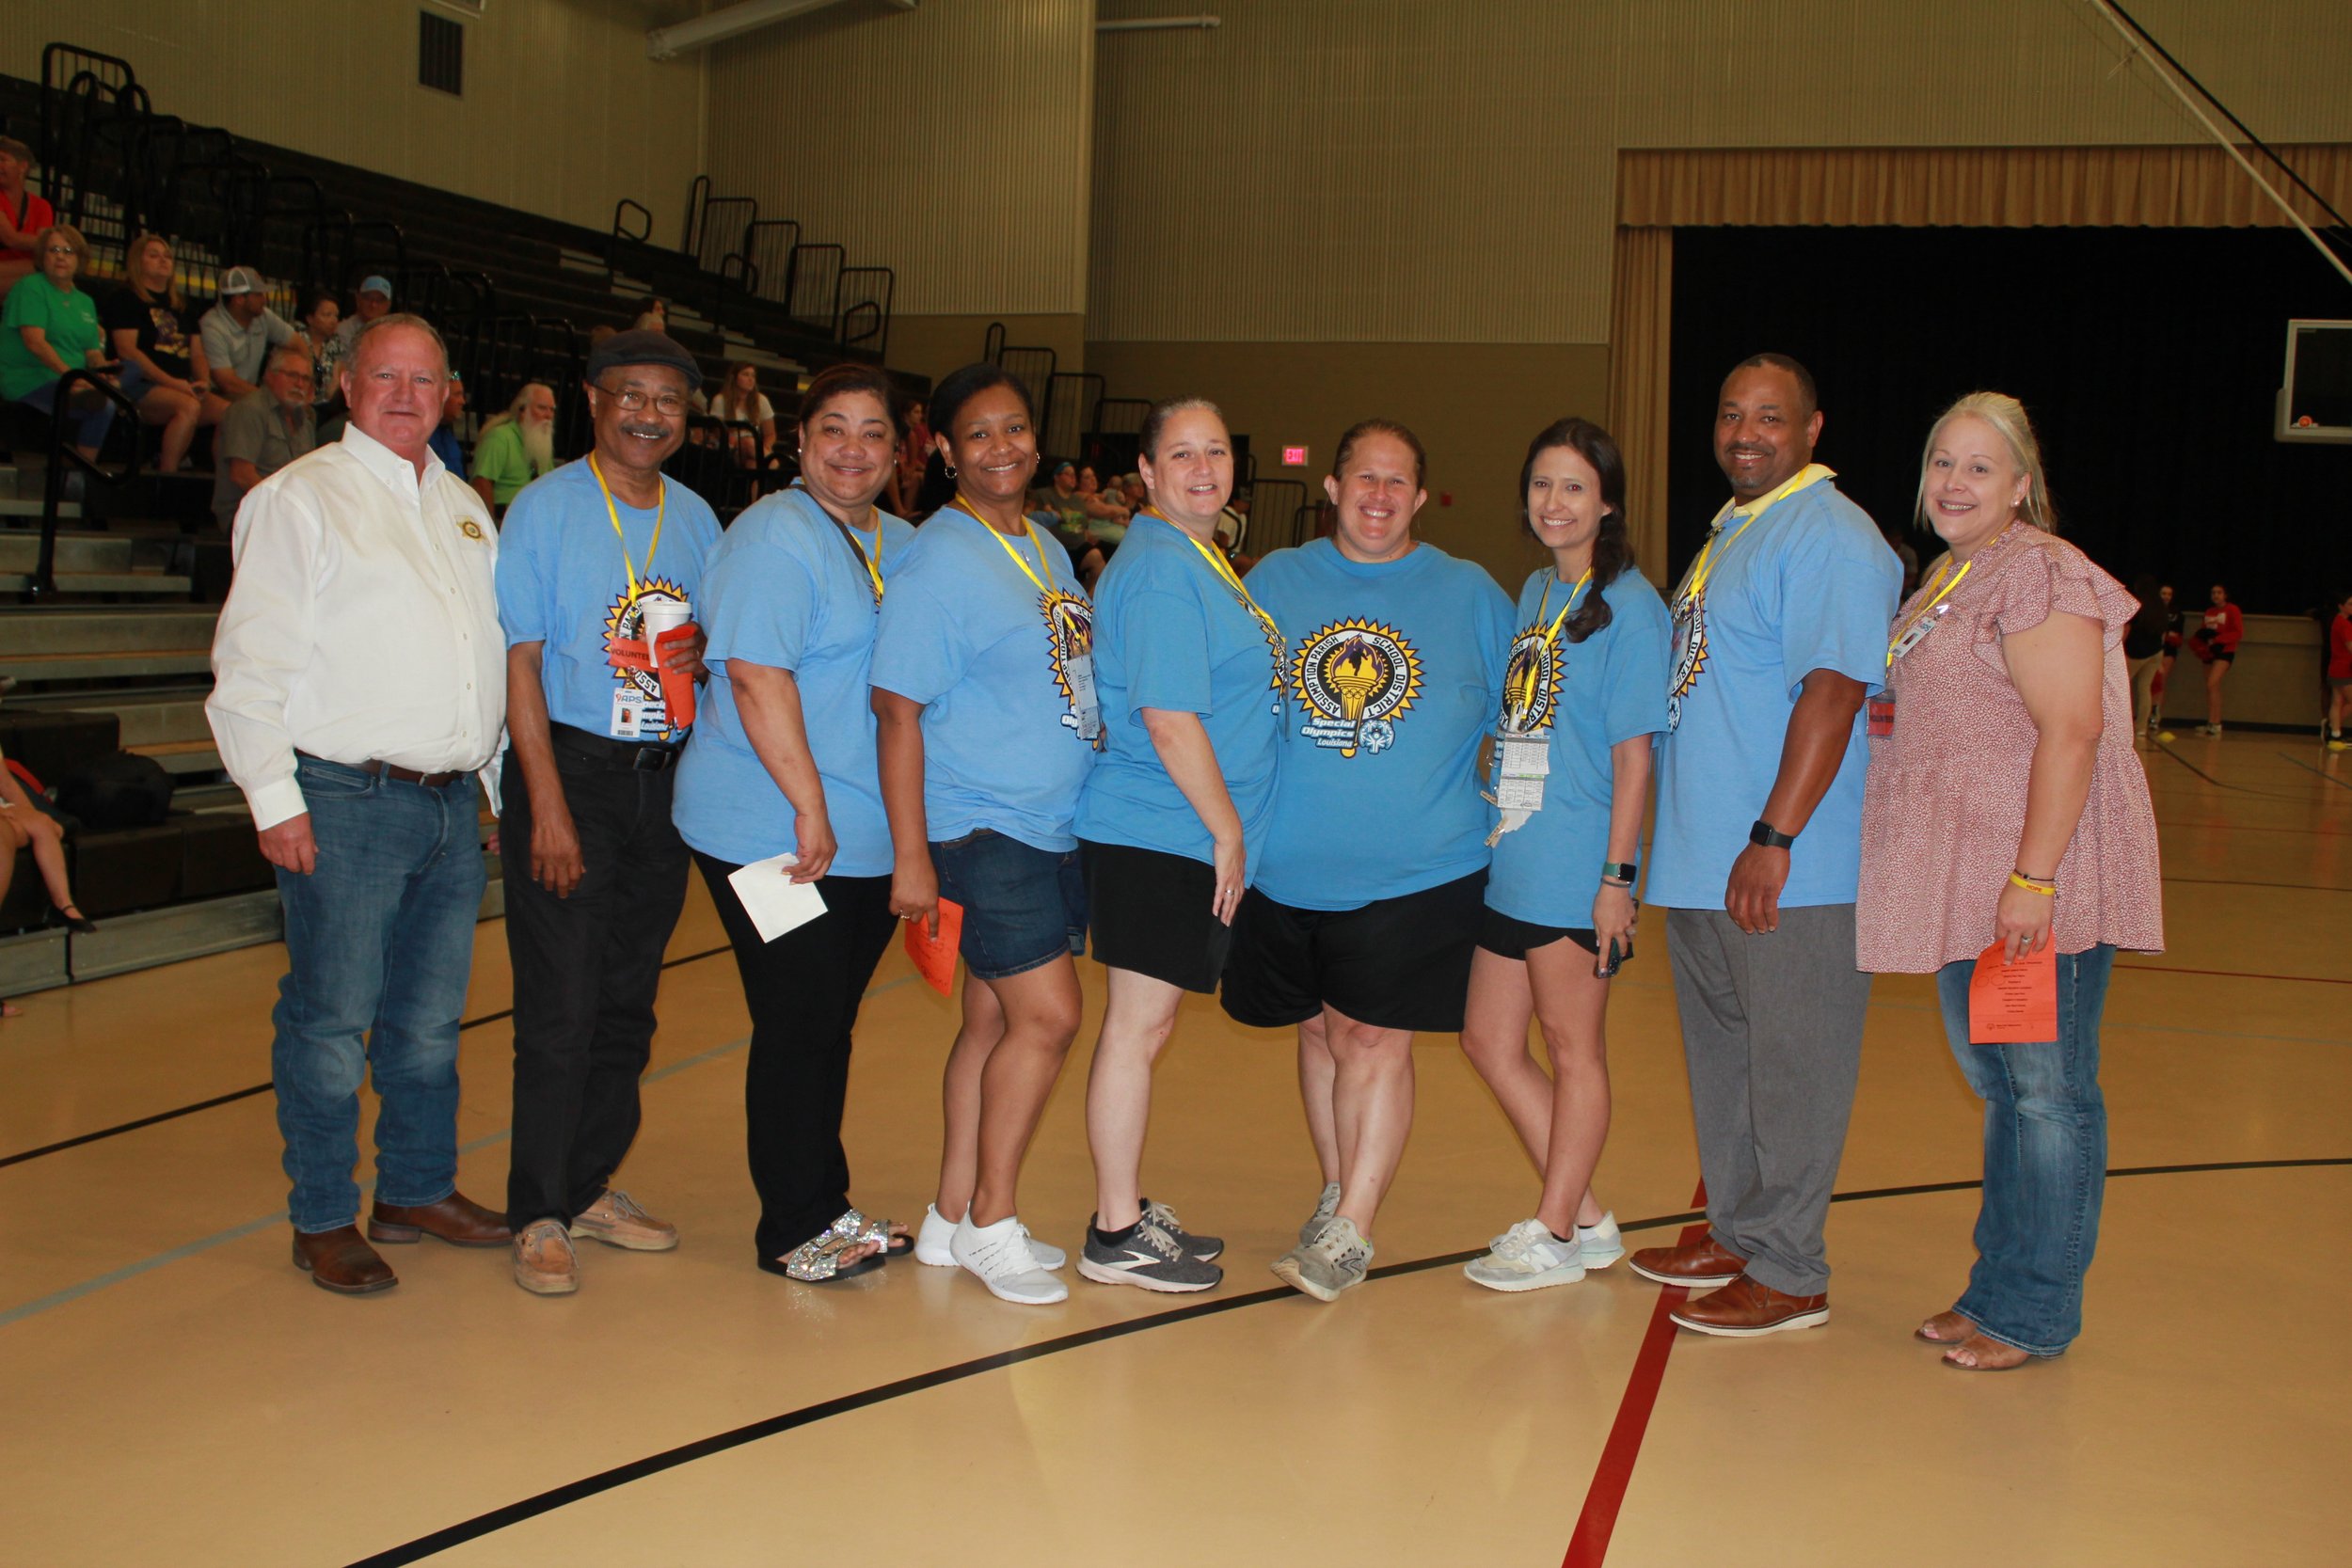  Pictured are those individuals who helped with organizing this year’s Assumption Parish Public Schools Special Olympics. They are, from left to right, Sheriff Leland Falcon, School Board Member Honoray Lewis, Special Education Director Margaret Cage